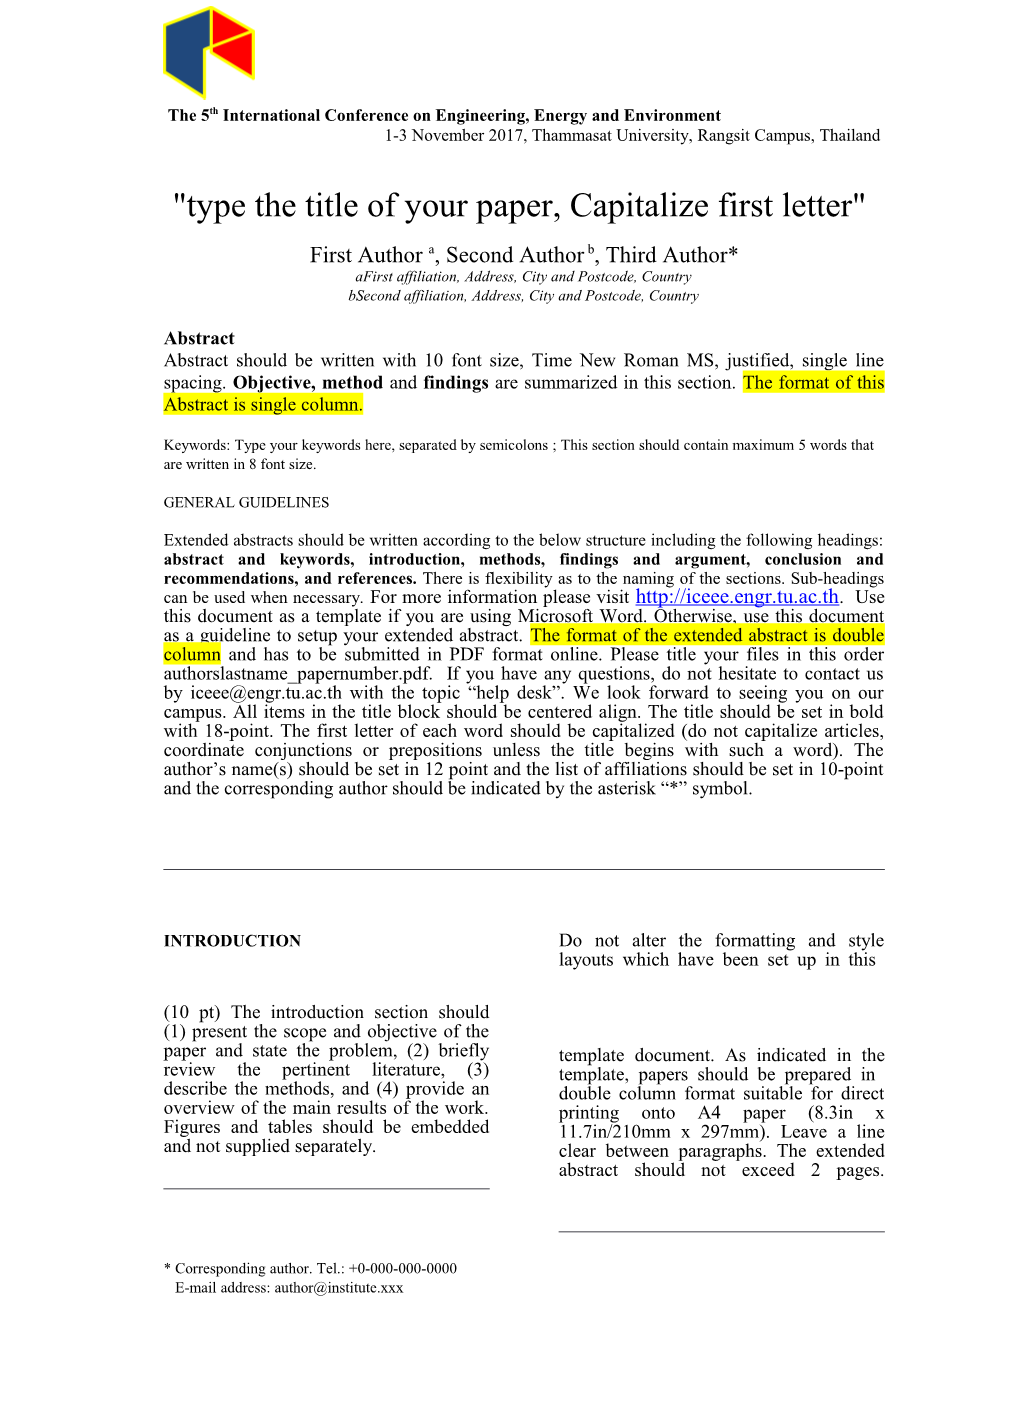 Type the Title of Your Paper, Capitalize First Letter